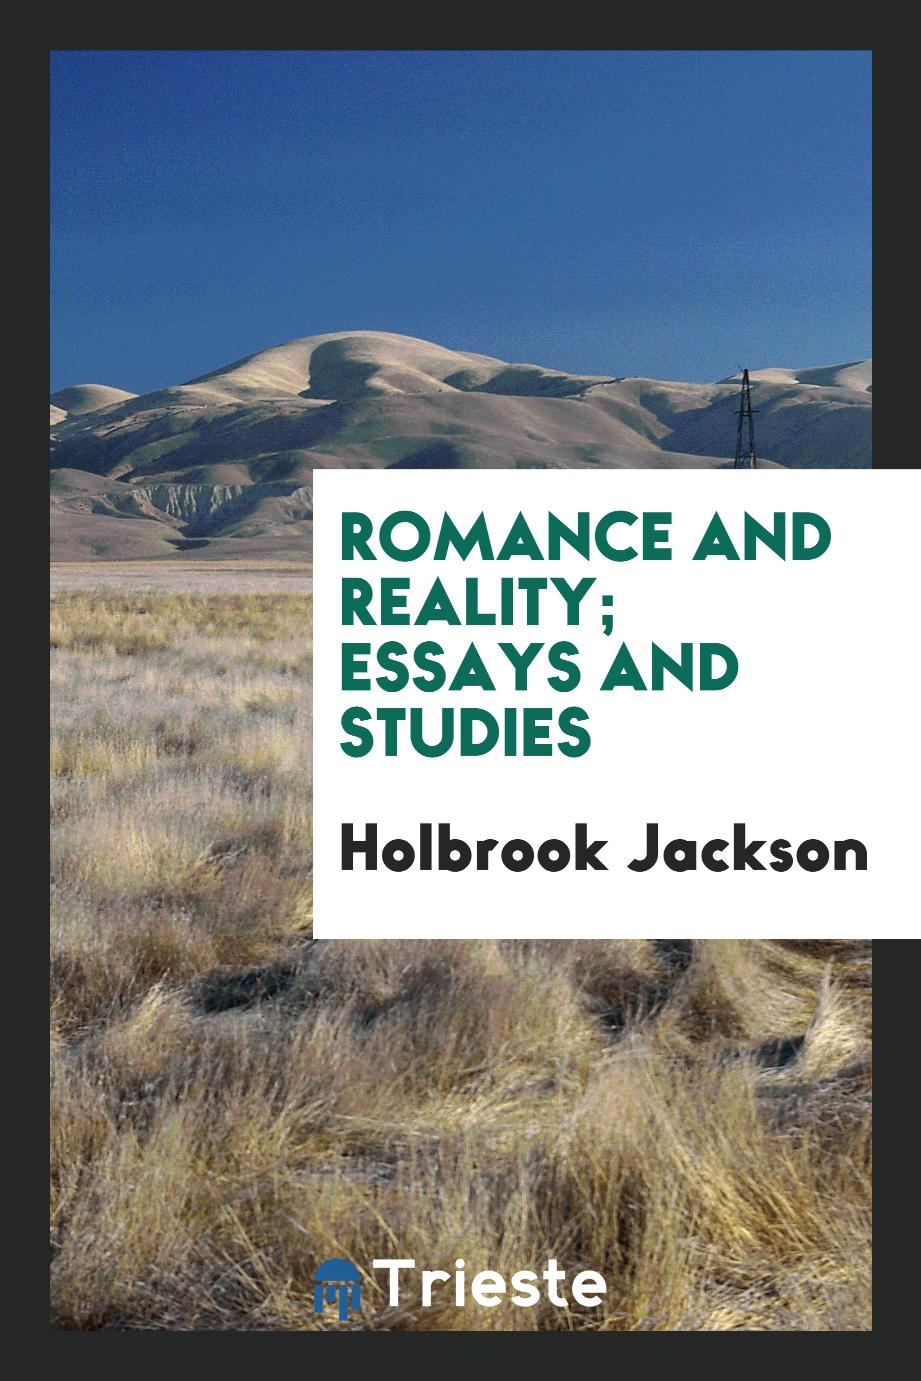 Romance and reality; essays and studies